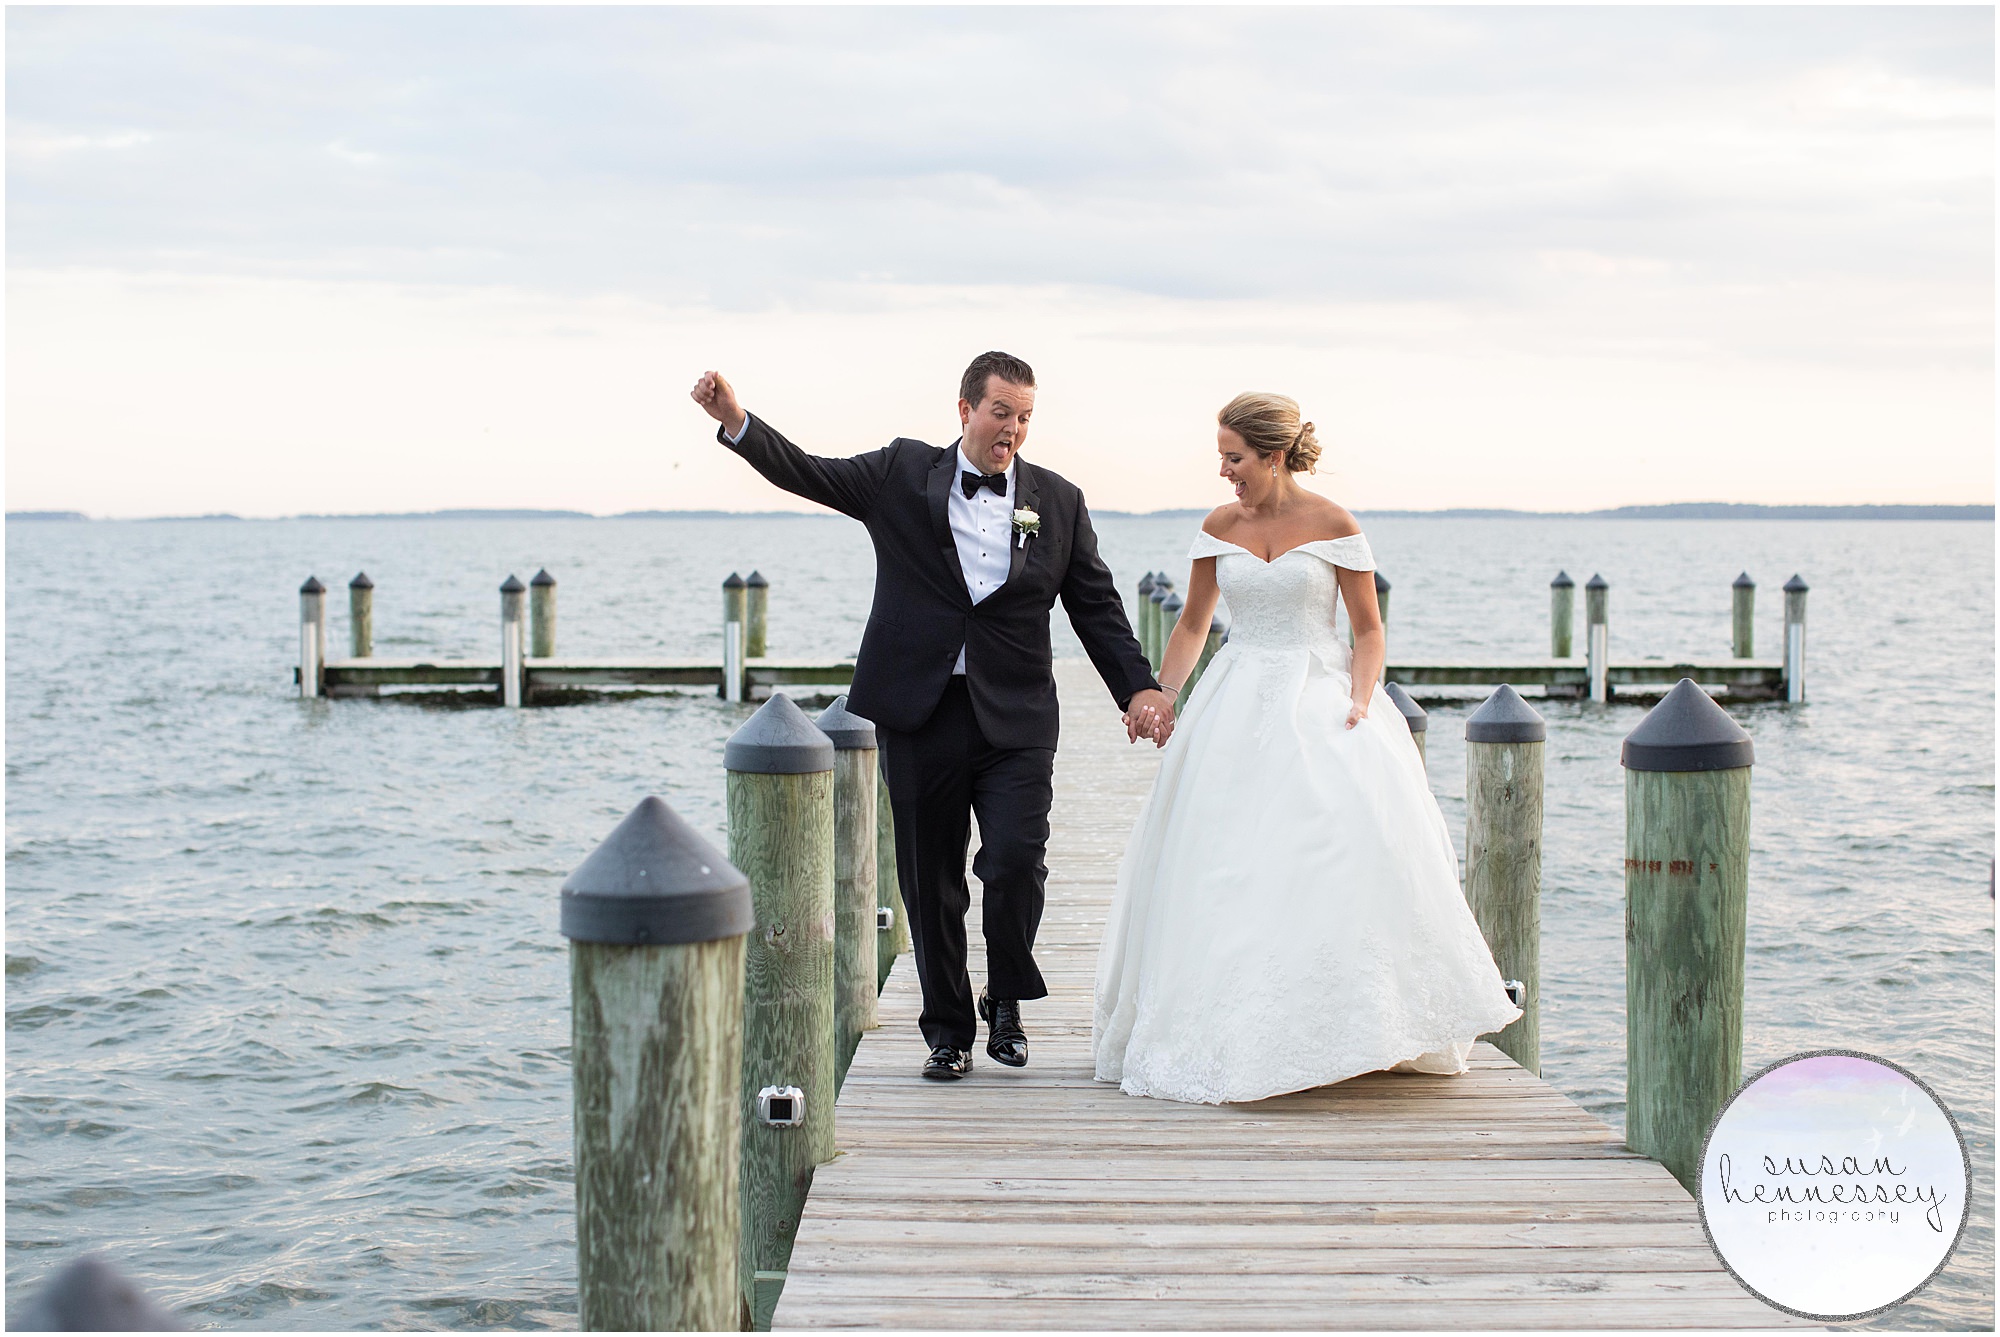 Couple on pier at waterfront wedding